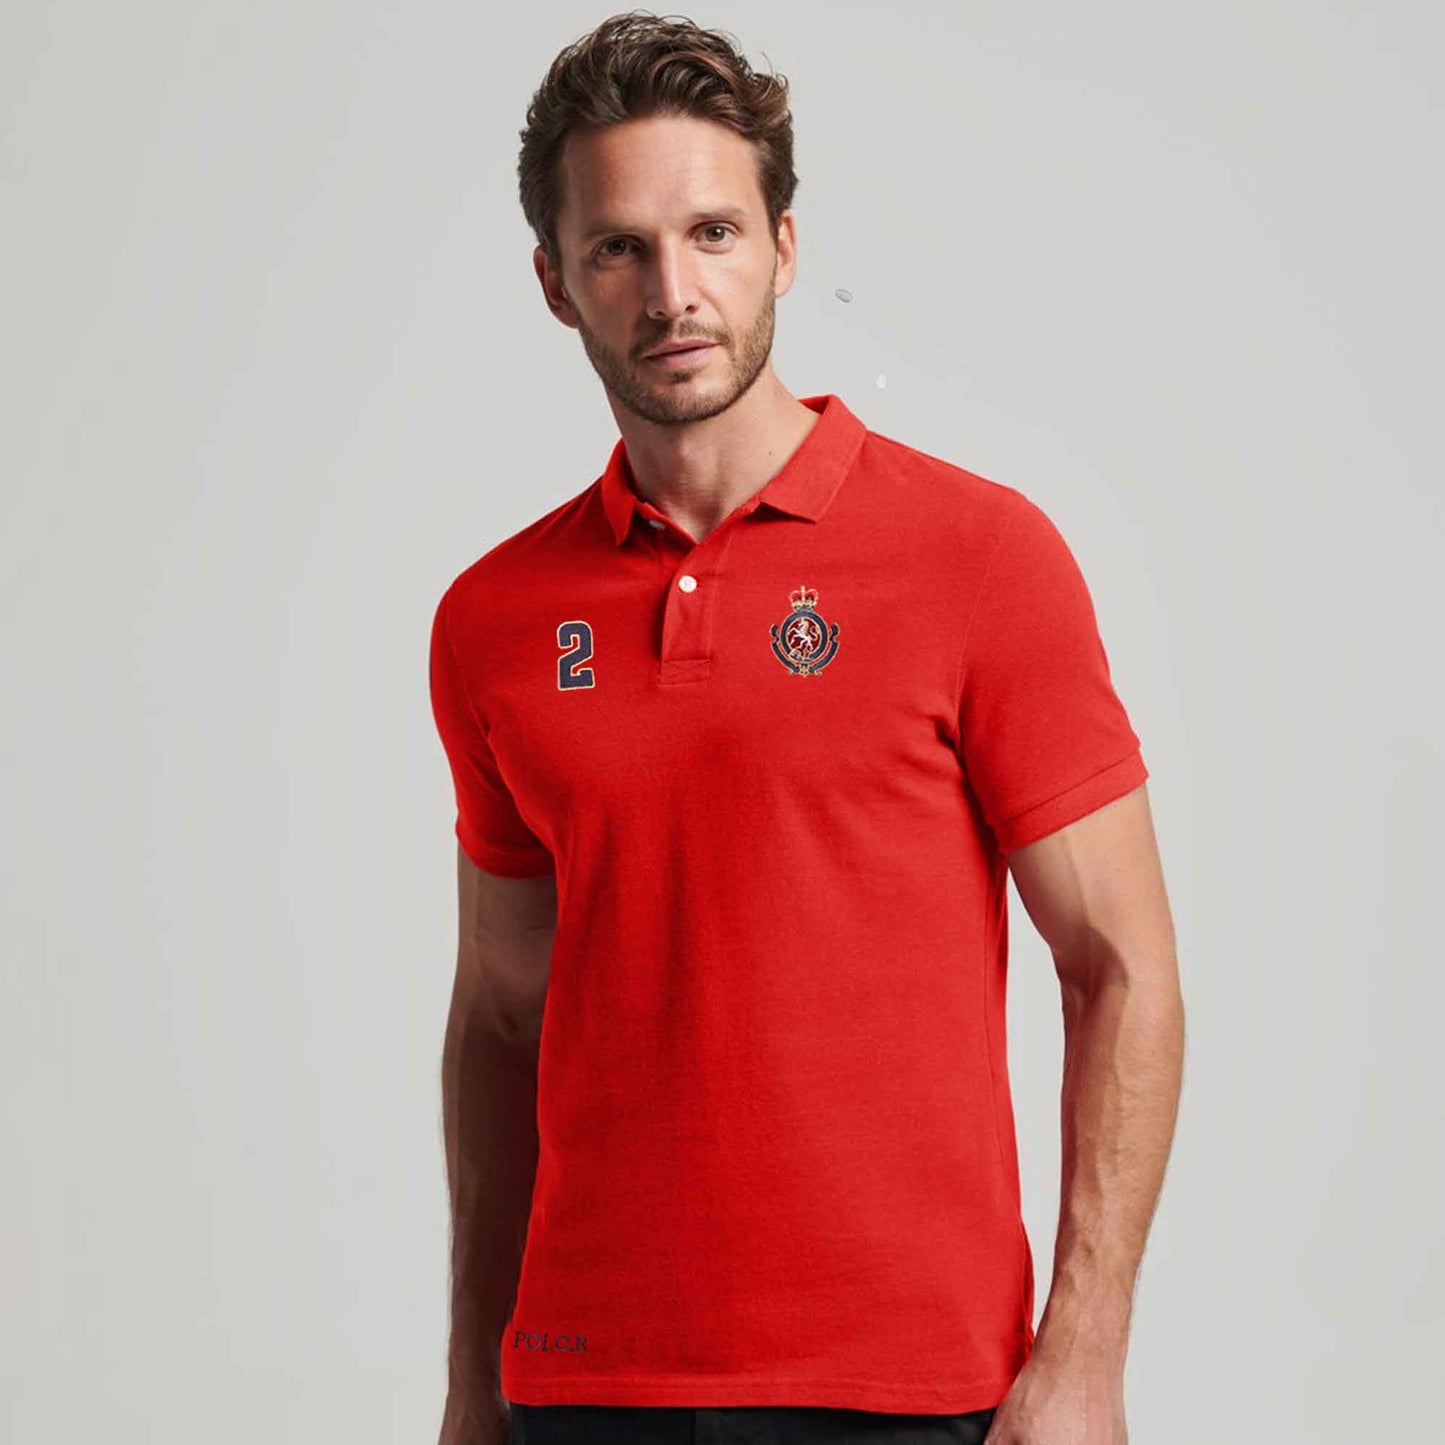 Polo Republica Men's Pony Crest & 2 Embroidered Short Sleeve Polo Shirt Men's Polo Shirt Polo Republica Red S 